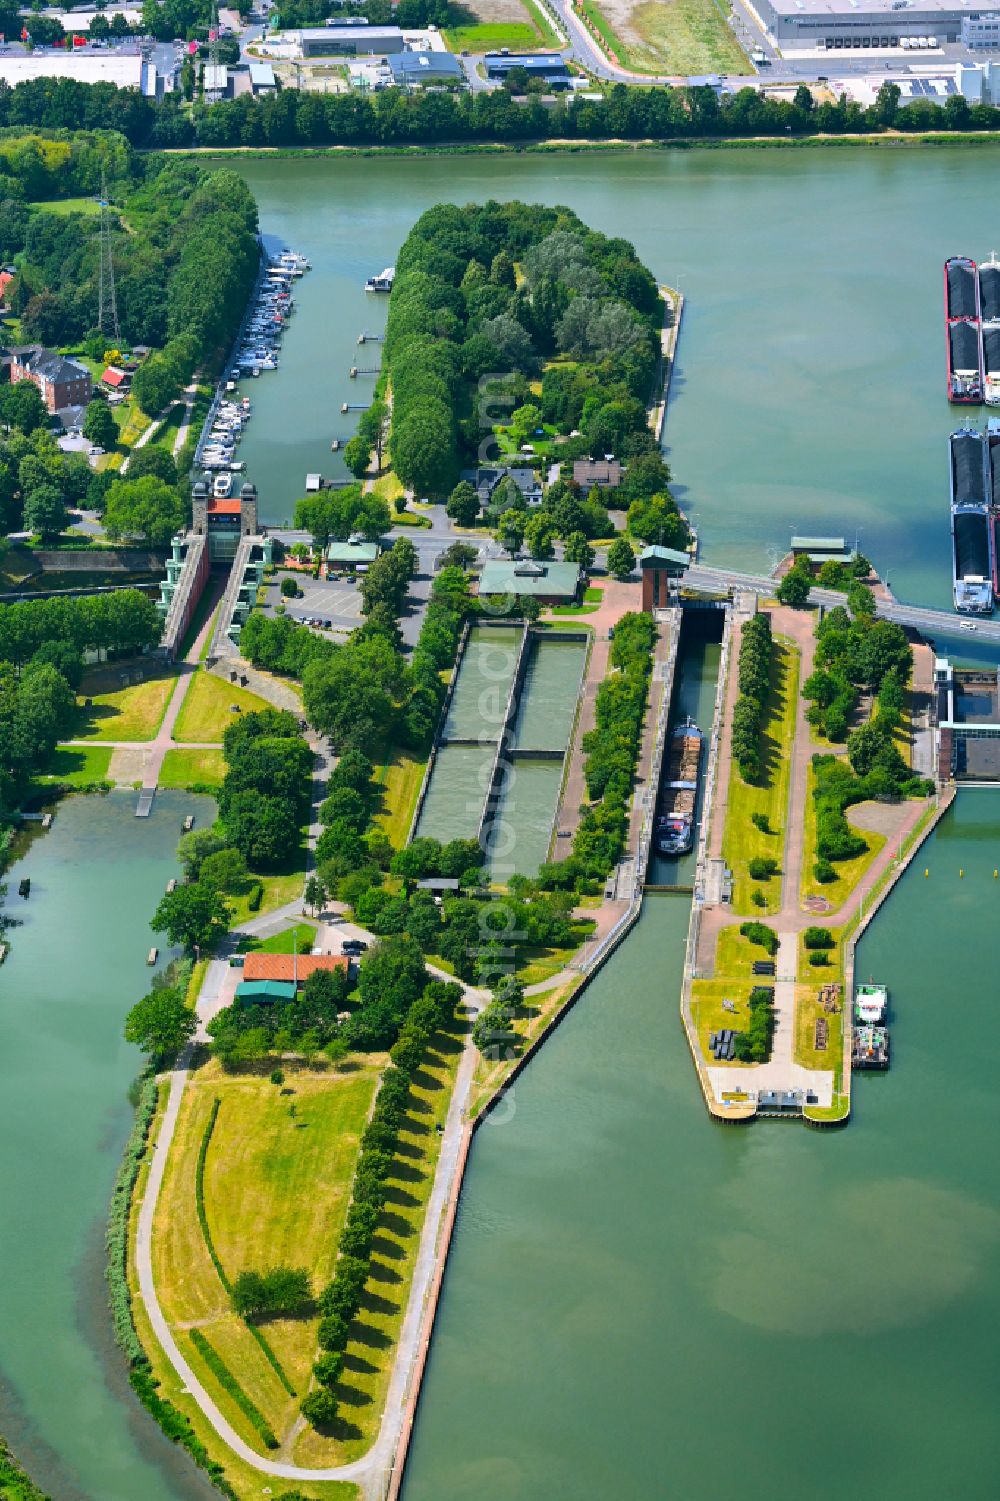 Aerial image Waltrop - View at the new ship lift and the saving sluice in the sluice park in the district Oberwiese in Waltrop in the federal state North Rhine-Westphalia